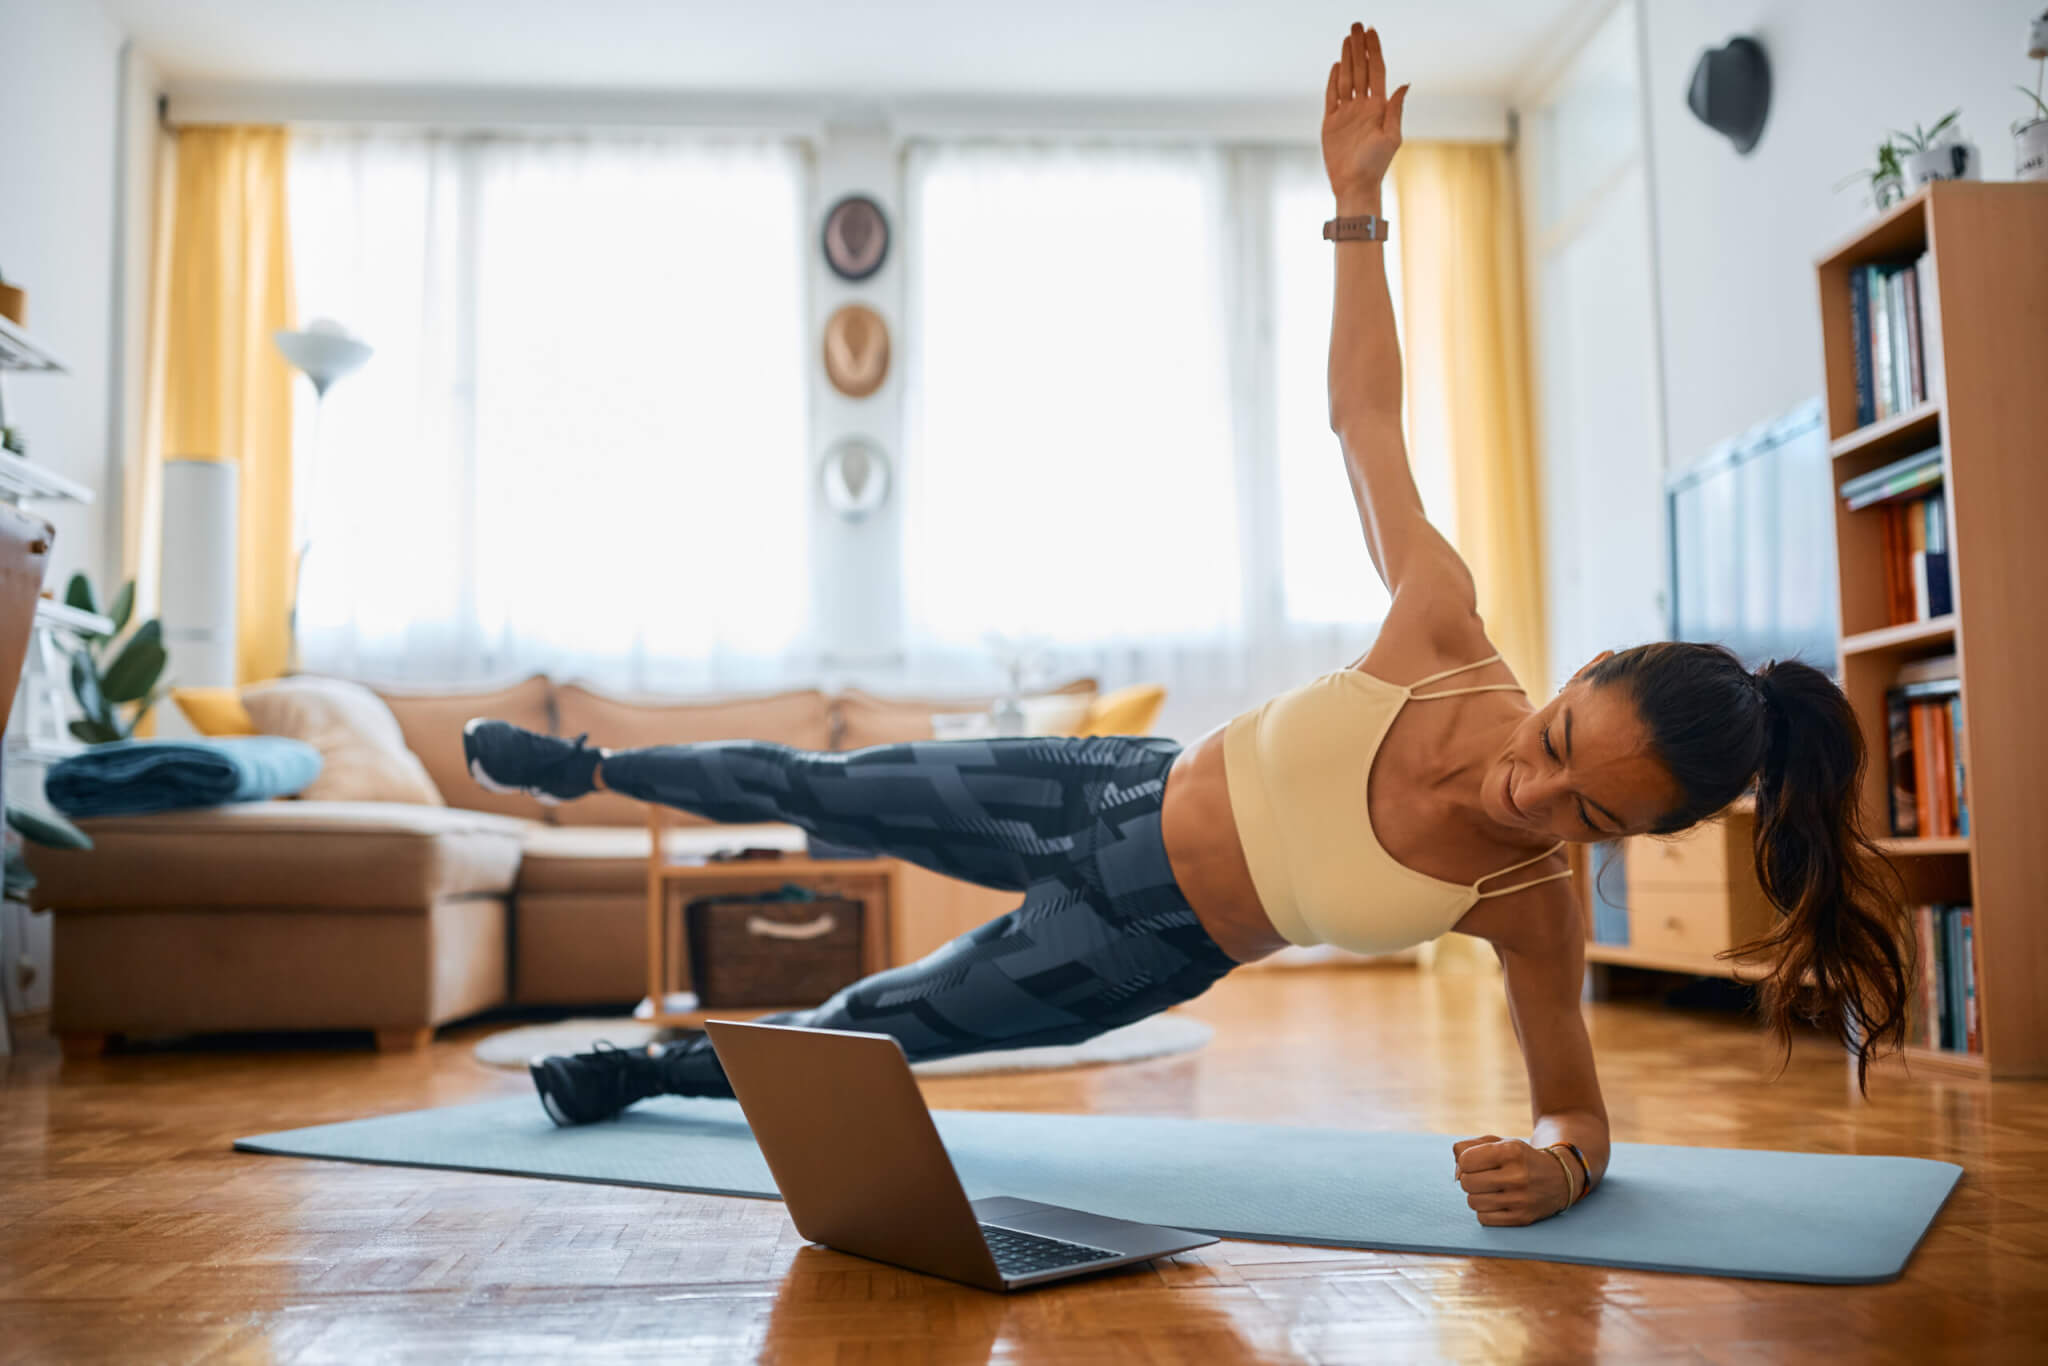 10 Fitness Apps to Kick Off A Healthy New Year